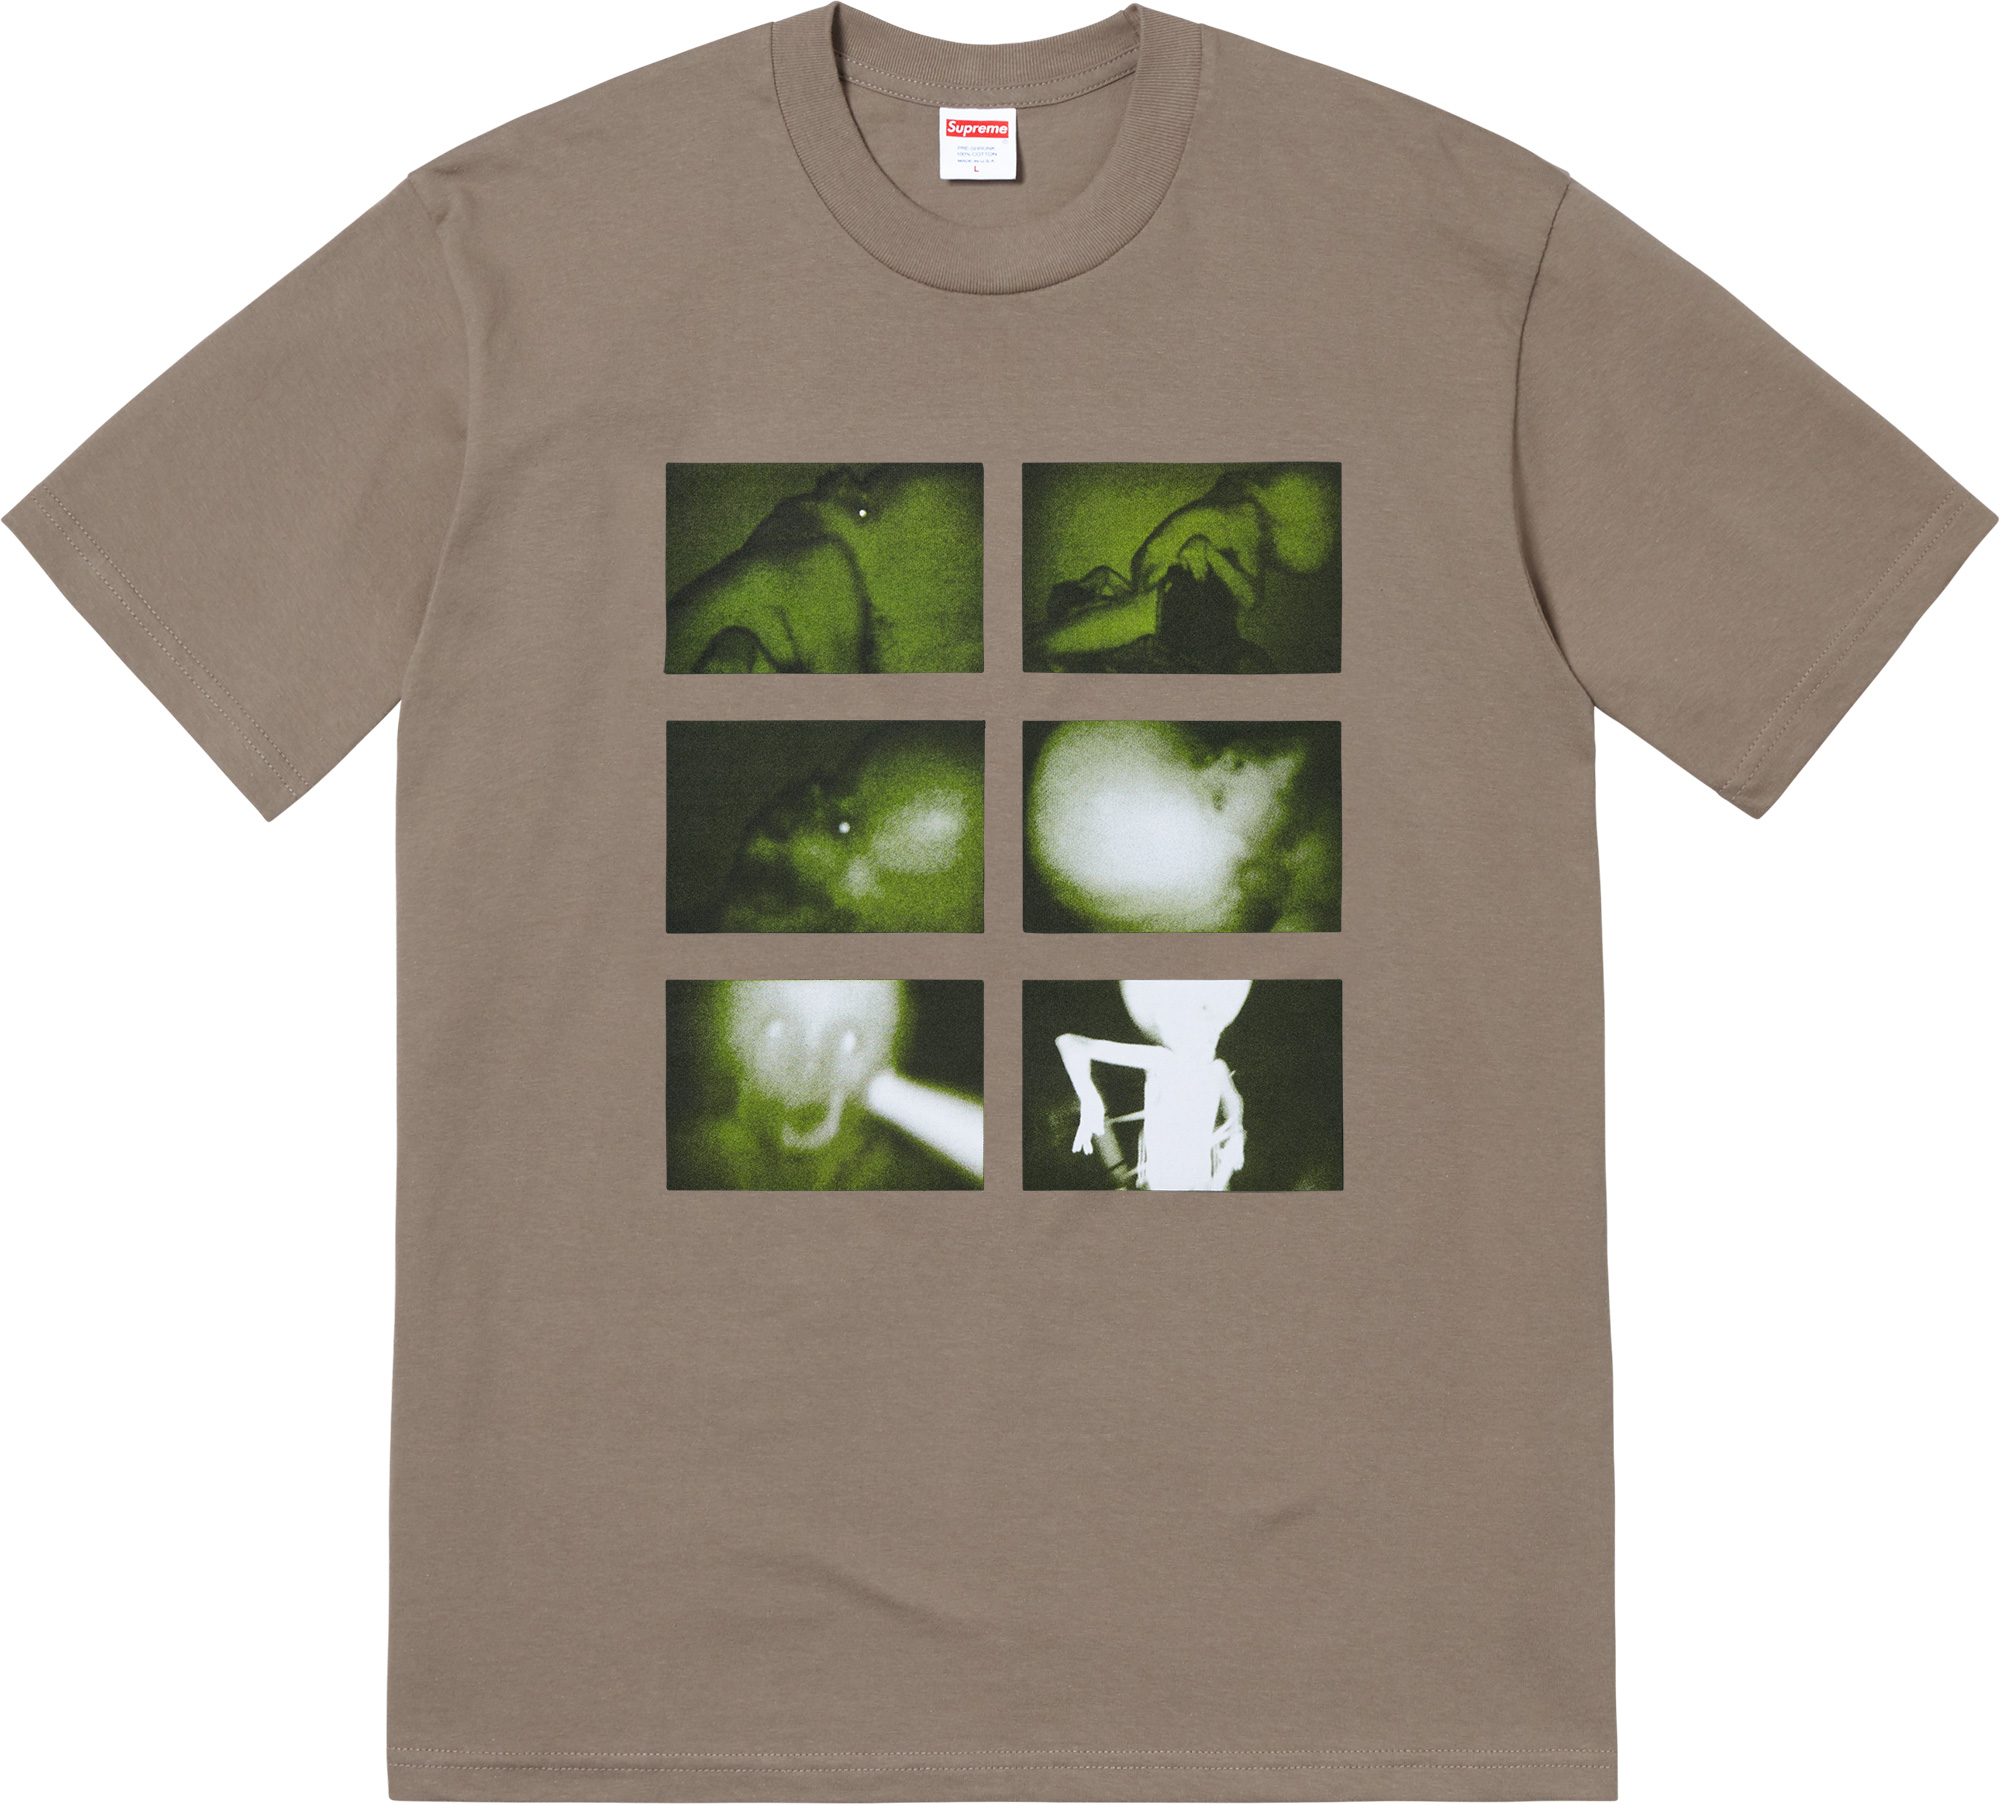 Supreme S New T Shirts Feature Aphex Twin S Creepiest Visuals I D